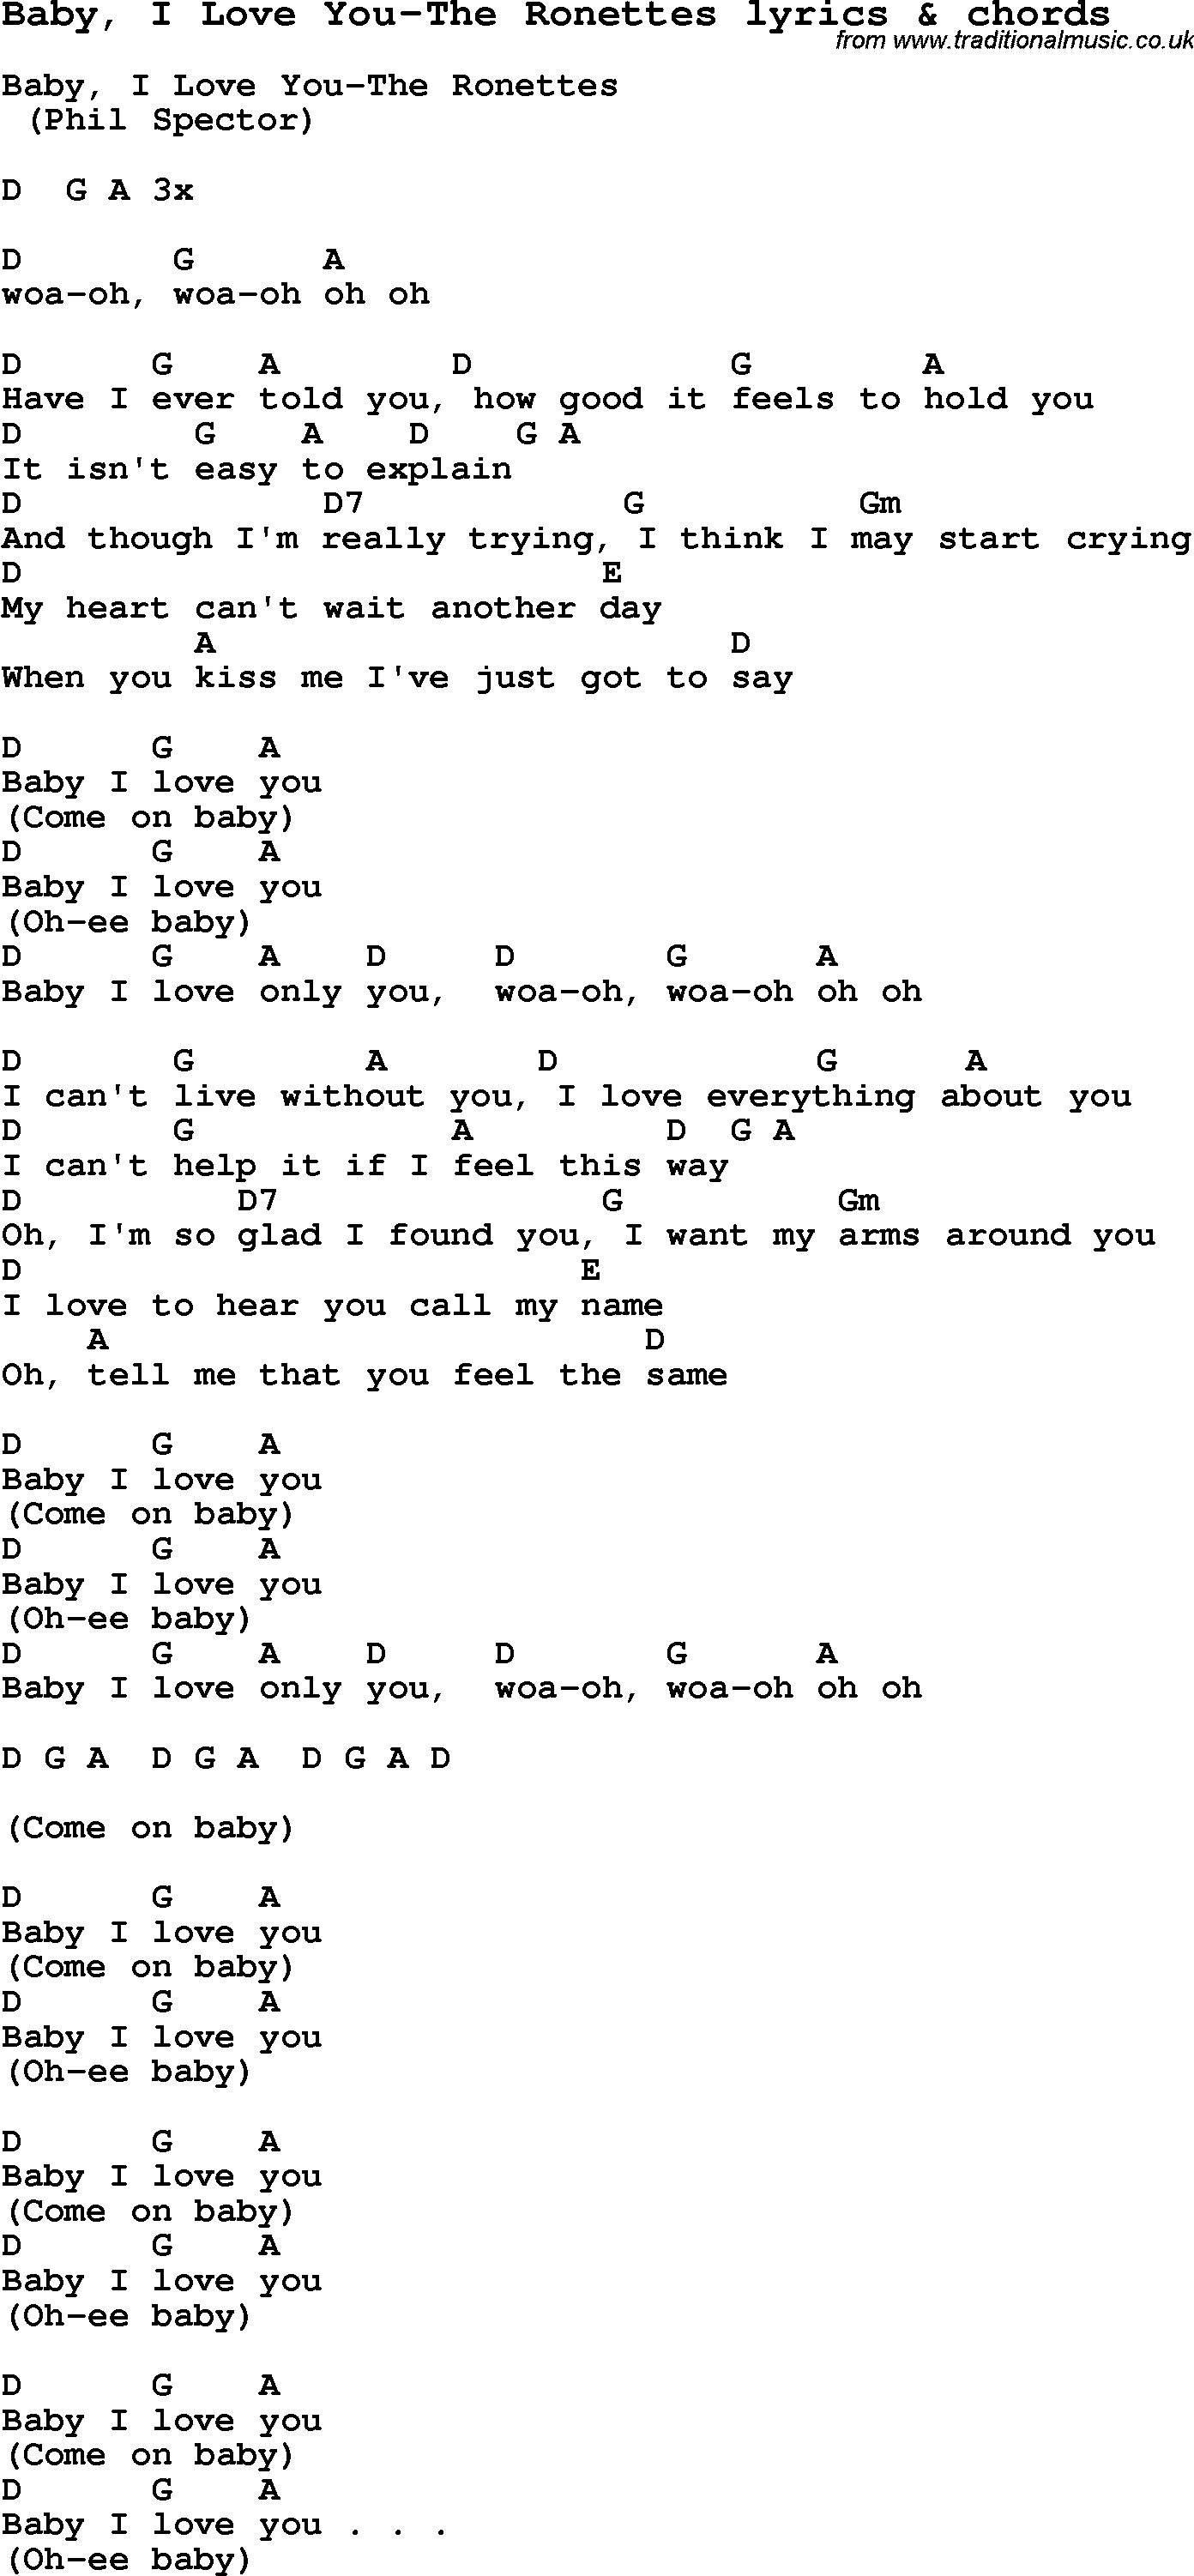 Love Song Lyrics For Baby I Love You The Ronettes With Chords